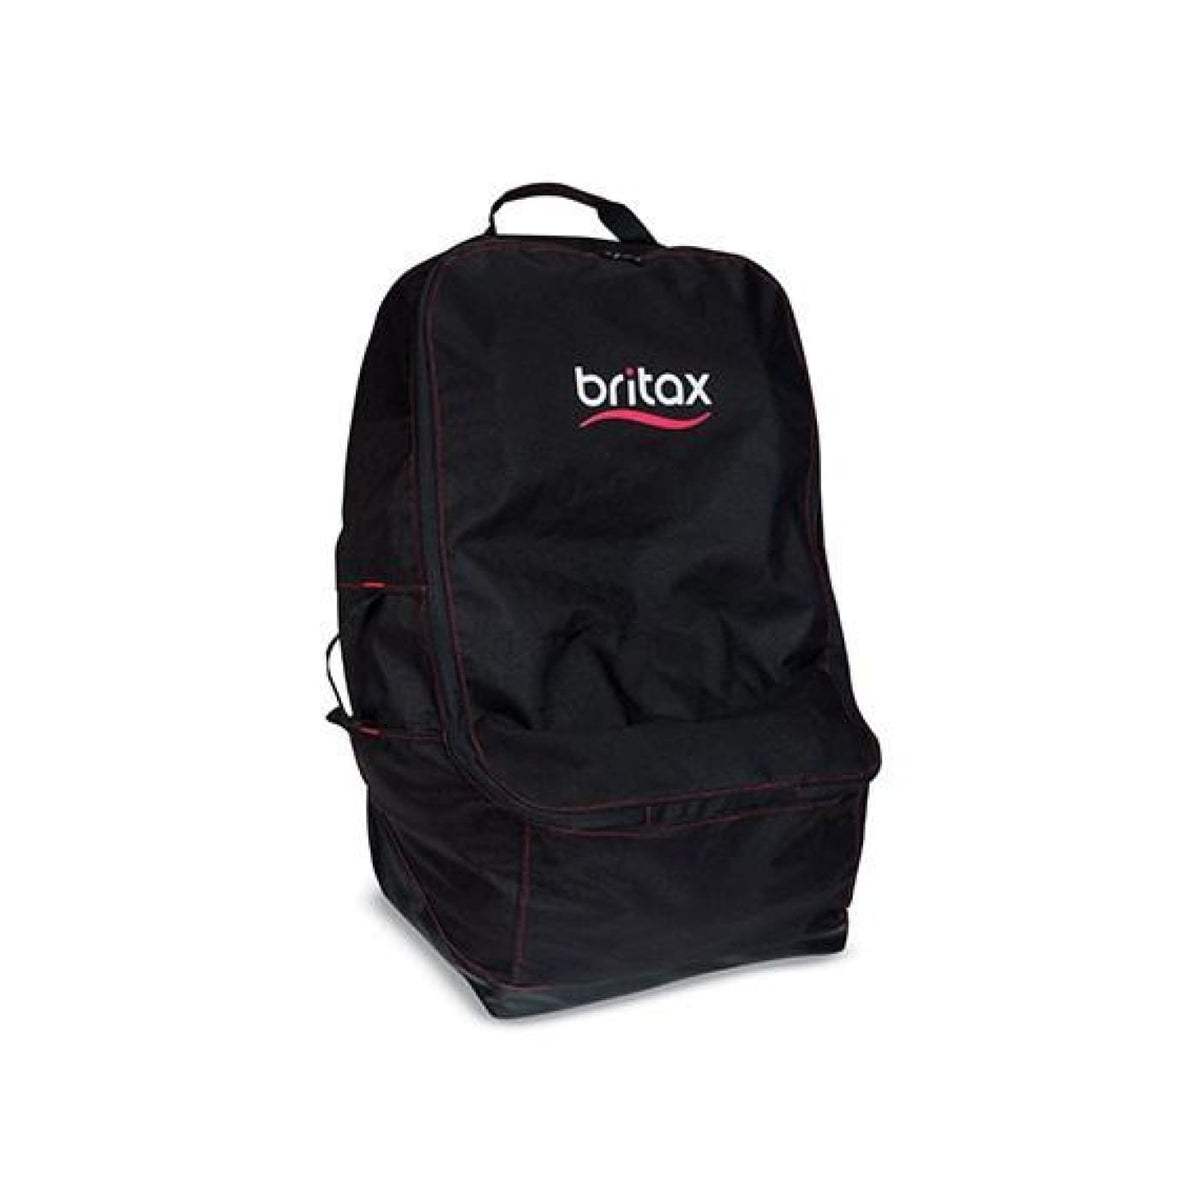 Britax Car Seat Travel Bag - ON THE GO - TRANSPORT BAGS